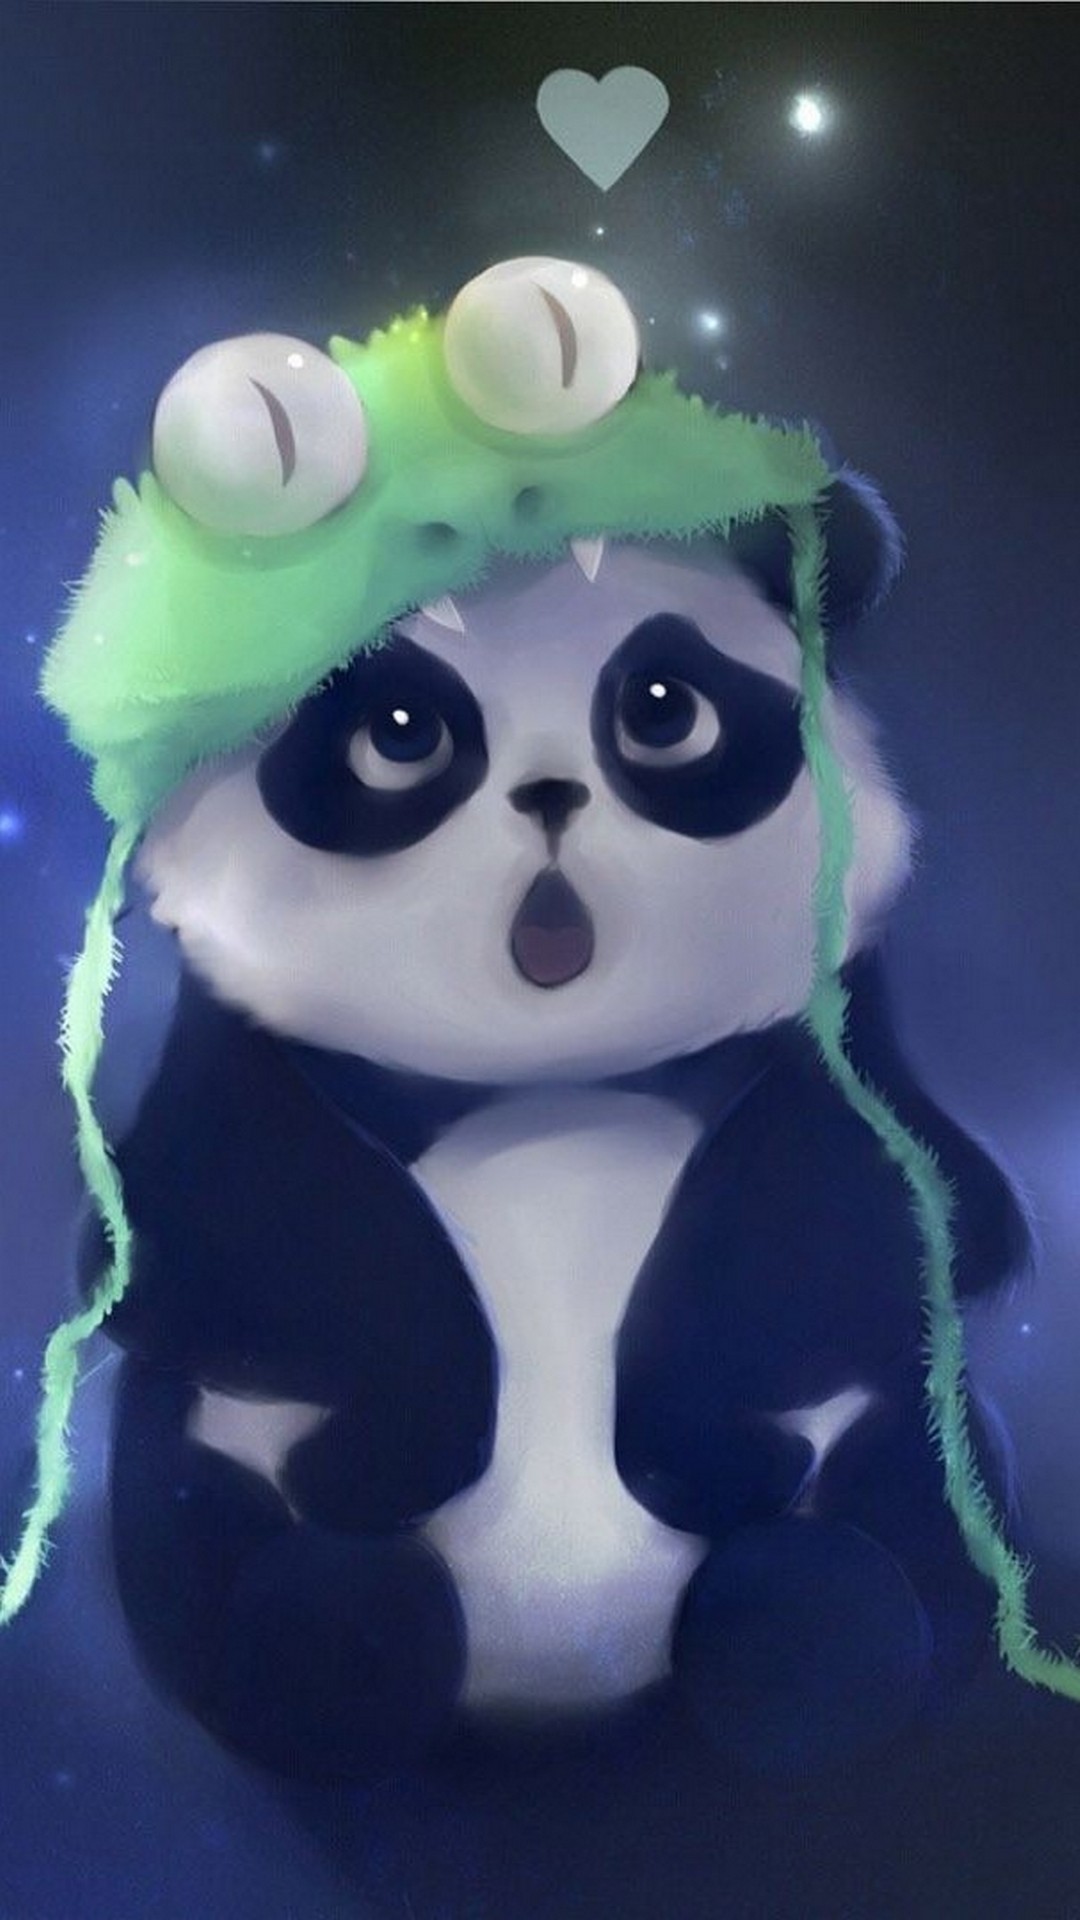 Baby Panda Android Wallpaper with HD resolution 1080x1920